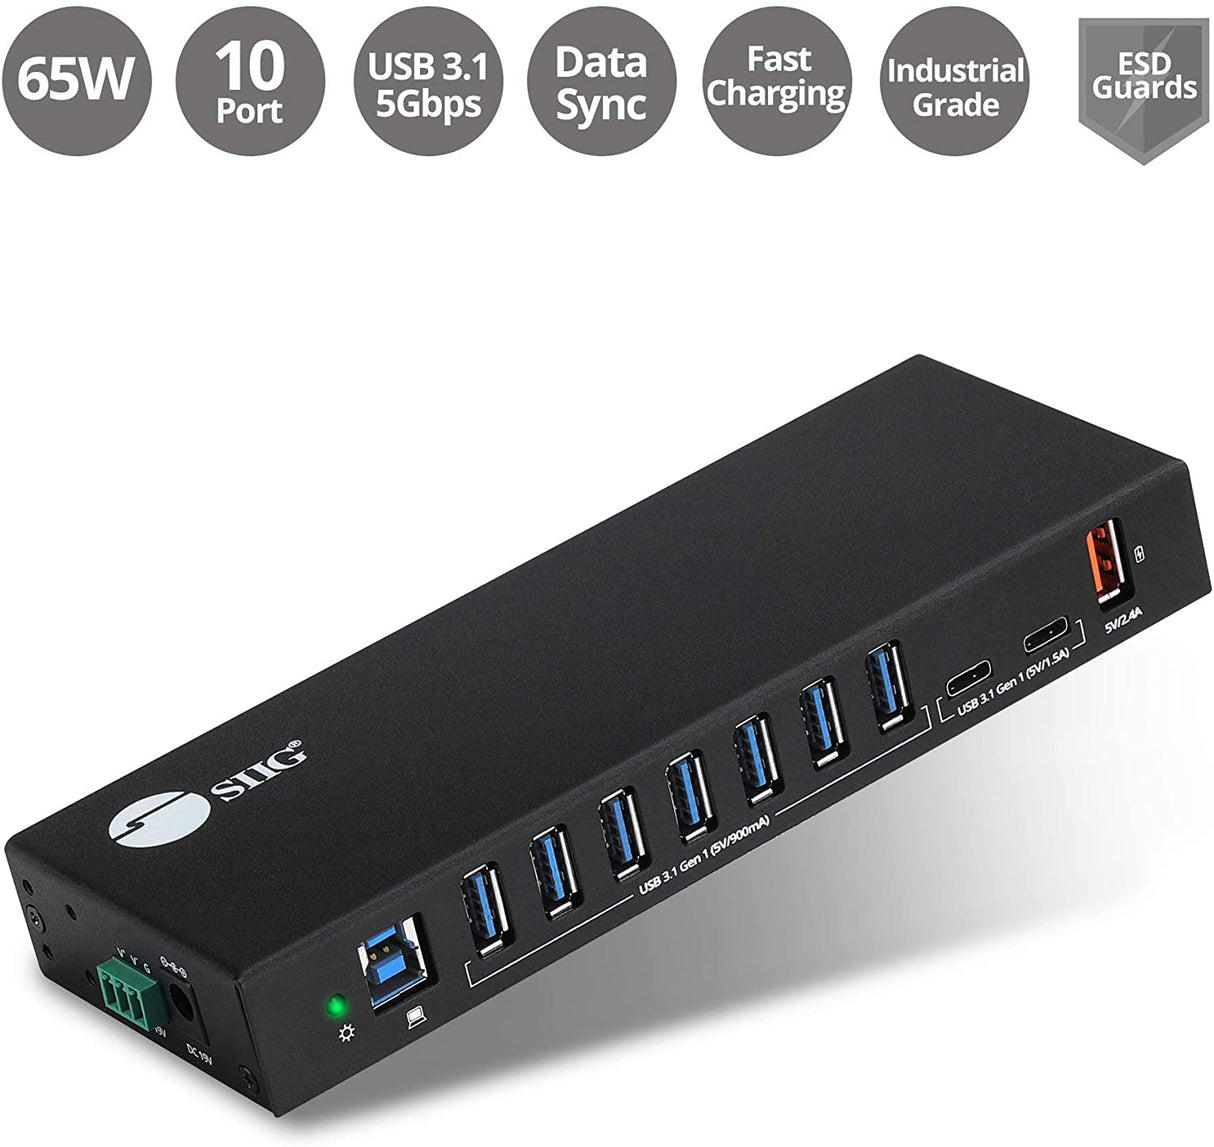 SIIG Industrial Powered USB C &amp; USB 3.1 Hub, Splitter, 10 Port, Powered Multiport Hub Expander for Desktop, Laptop, Tablets, Cellphone, External HD, Keyboard and Mouse (ID-US0811-S1)